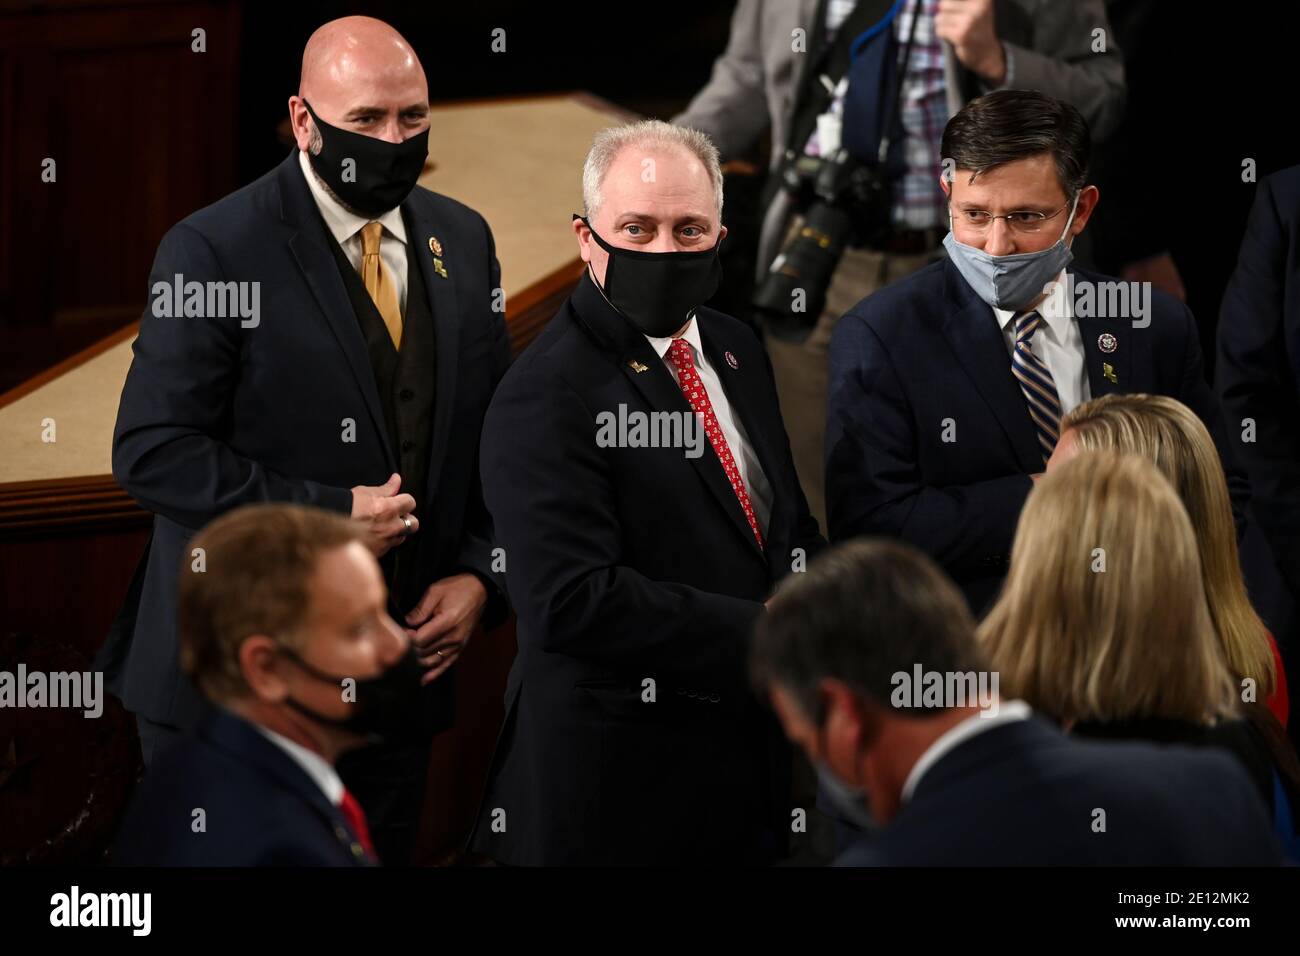 United States House Minority Whip Steve Scalise (Republican of Louisiana), center, attends the opening day of the 117th Congress at the U.S. Capitol in Washington, DC on January 03, 2021.Credit: Bill O'Leary/Pool via CNP /MediaPunch Stock Photo